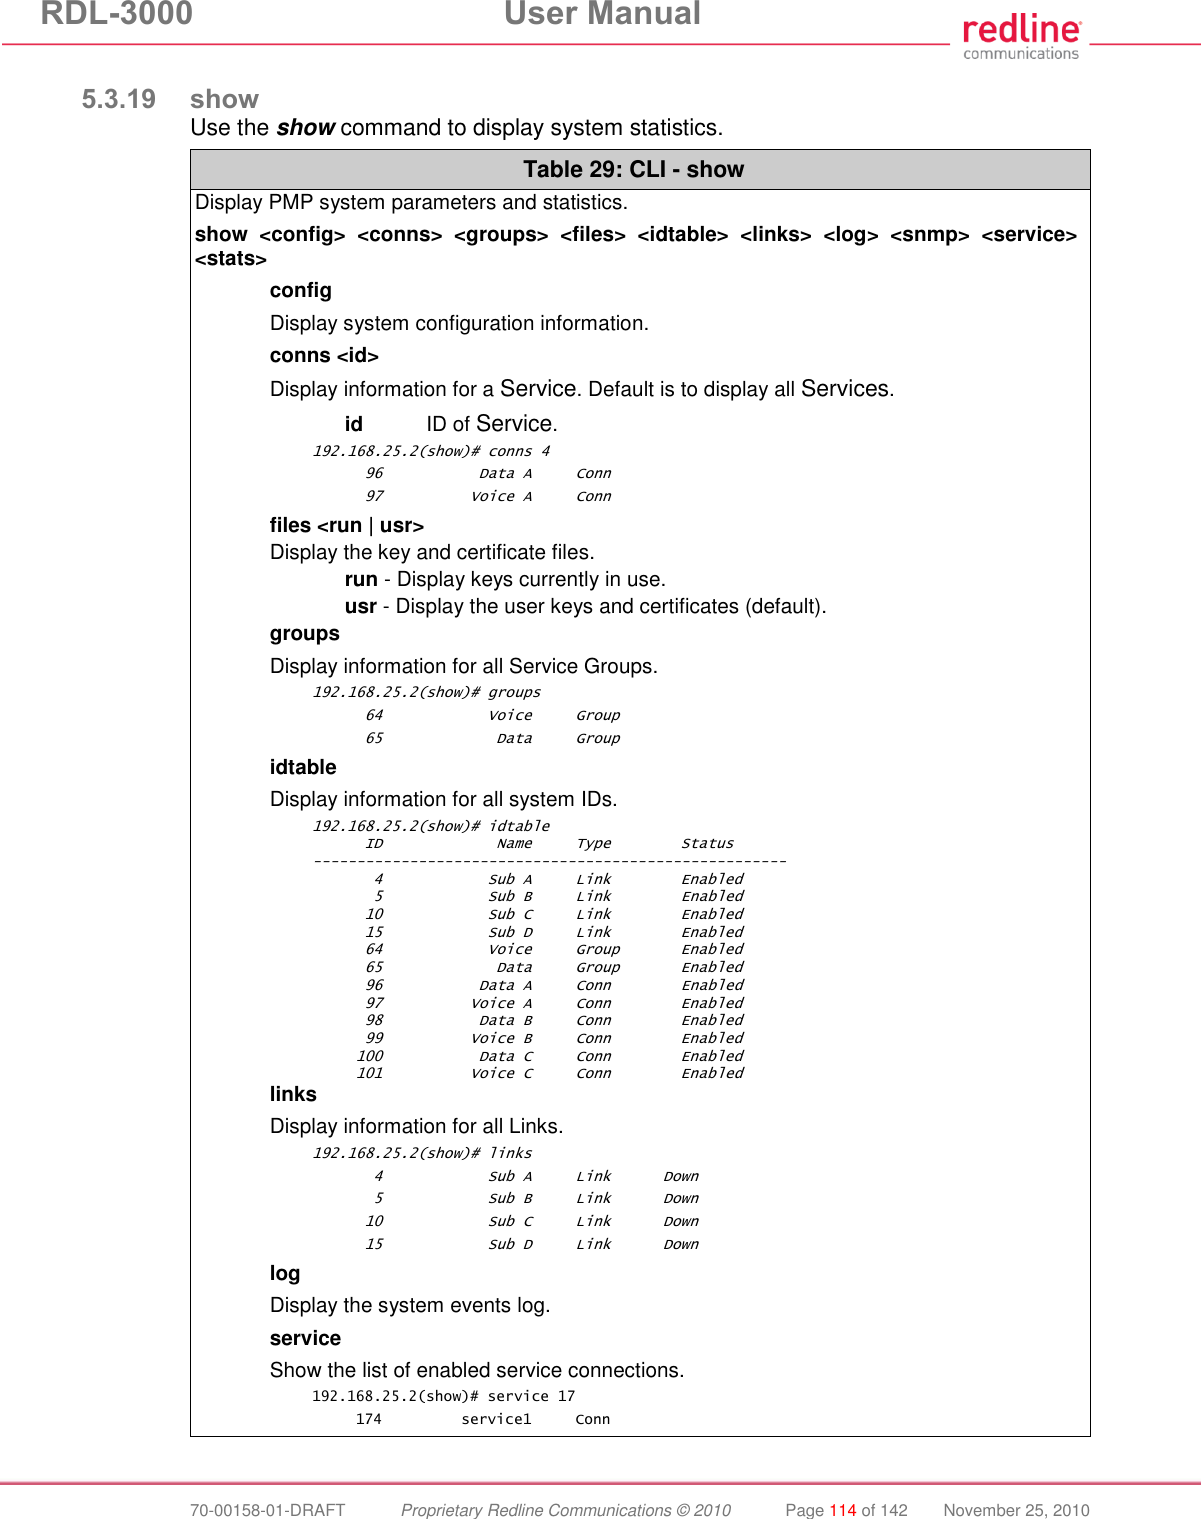 RDL-3000  User Manual  70-00158-01-DRAFT  Proprietary Redline Communications © 2010  Page 114 of 142  November 25, 2010  5.3.19 show Use the show command to display system statistics. Table 29: CLI - show Display PMP system parameters and statistics. show  &lt;config&gt;  &lt;conns&gt;  &lt;groups&gt;  &lt;files&gt;  &lt;idtable&gt;  &lt;links&gt;  &lt;log&gt;  &lt;snmp&gt;  &lt;service&gt; &lt;stats&gt; config Display system configuration information. conns &lt;id&gt; Display information for a Service. Default is to display all Services.  id  ID of Service. 192.168.25.2(show)# conns 4       96           Data A     Conn       97          Voice A     Conn files &lt;run | usr&gt; Display the key and certificate files.  run - Display keys currently in use.  usr - Display the user keys and certificates (default). groups Display information for all Service Groups. 192.168.25.2(show)# groups       64            Voice     Group       65             Data     Group idtable Display information for all system IDs. 192.168.25.2(show)# idtable       ID             Name     Type        Status ------------------------------------------------------        4            Sub A     Link        Enabled        5            Sub B     Link        Enabled       10            Sub C     Link        Enabled       15            Sub D     Link        Enabled       64            Voice     Group       Enabled       65             Data     Group       Enabled       96           Data A     Conn        Enabled       97          Voice A     Conn        Enabled       98           Data B     Conn        Enabled       99          Voice B     Conn        Enabled      100           Data C     Conn        Enabled      101          Voice C     Conn        Enabled links Display information for all Links. 192.168.25.2(show)# links        4            Sub A     Link      Down        5            Sub B     Link      Down       10            Sub C     Link      Down       15            Sub D     Link      Down  log Display the system events log. service Show the list of enabled service connections. 192.168.25.2(show)# service 17      174         service1     Conn 